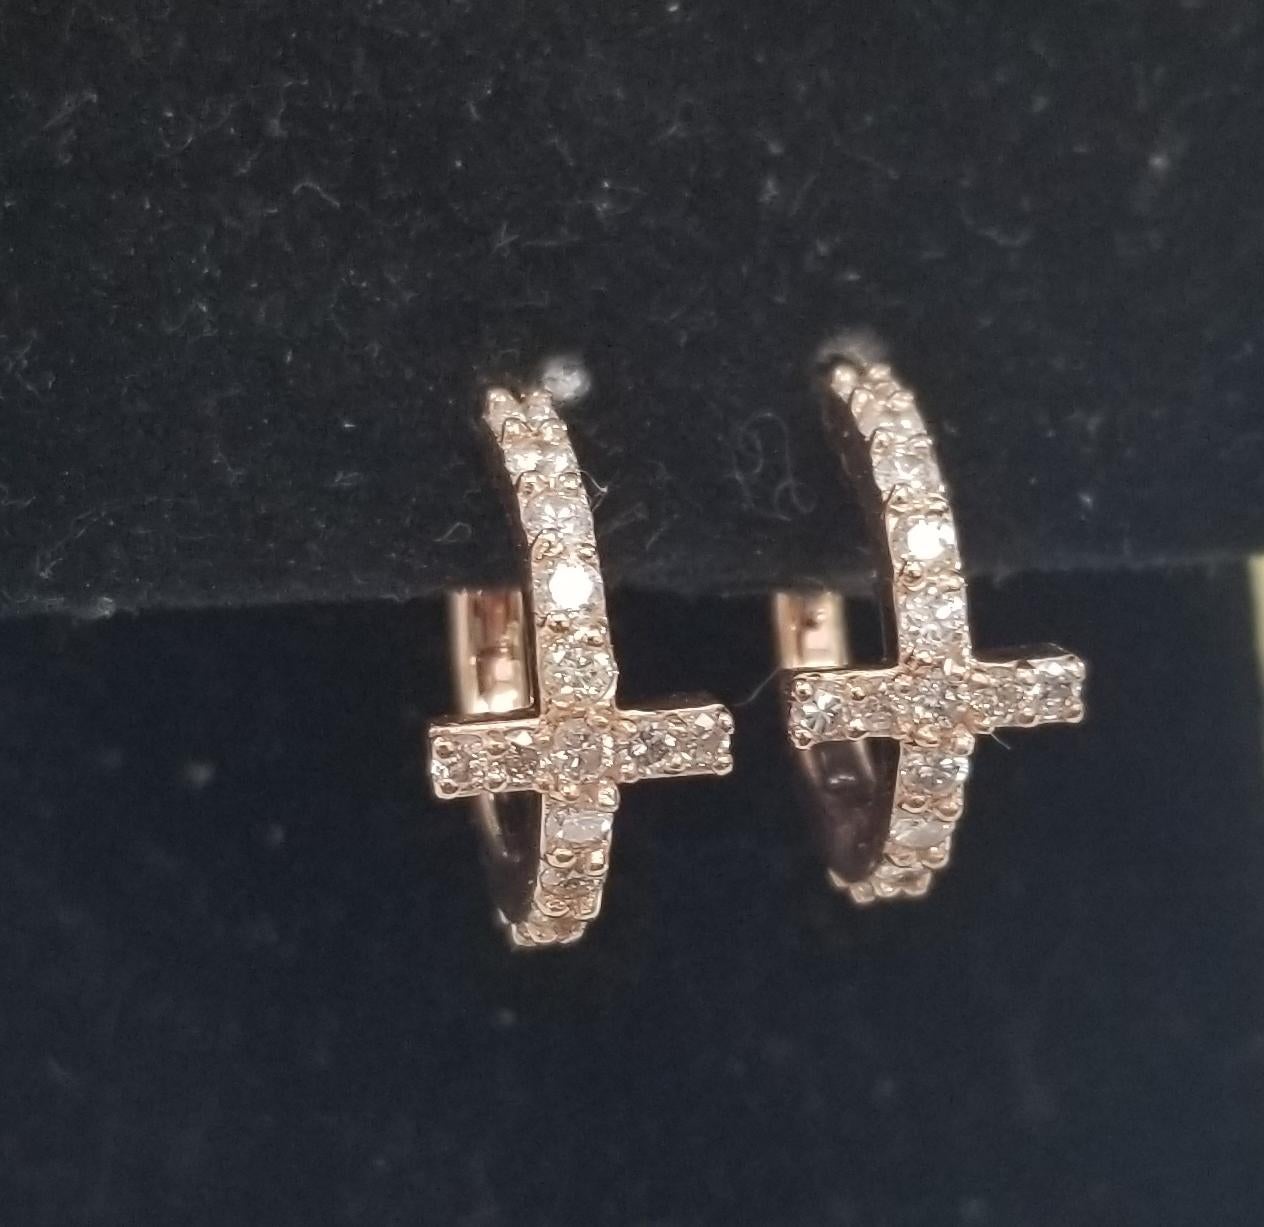 14k rose gold diamond cross hoop earrings containing 30 round full cut diamonds; color G, clarity SI1-2 and weight .70pts.,  
*This could be made in 14k white, yellow or rose gold*